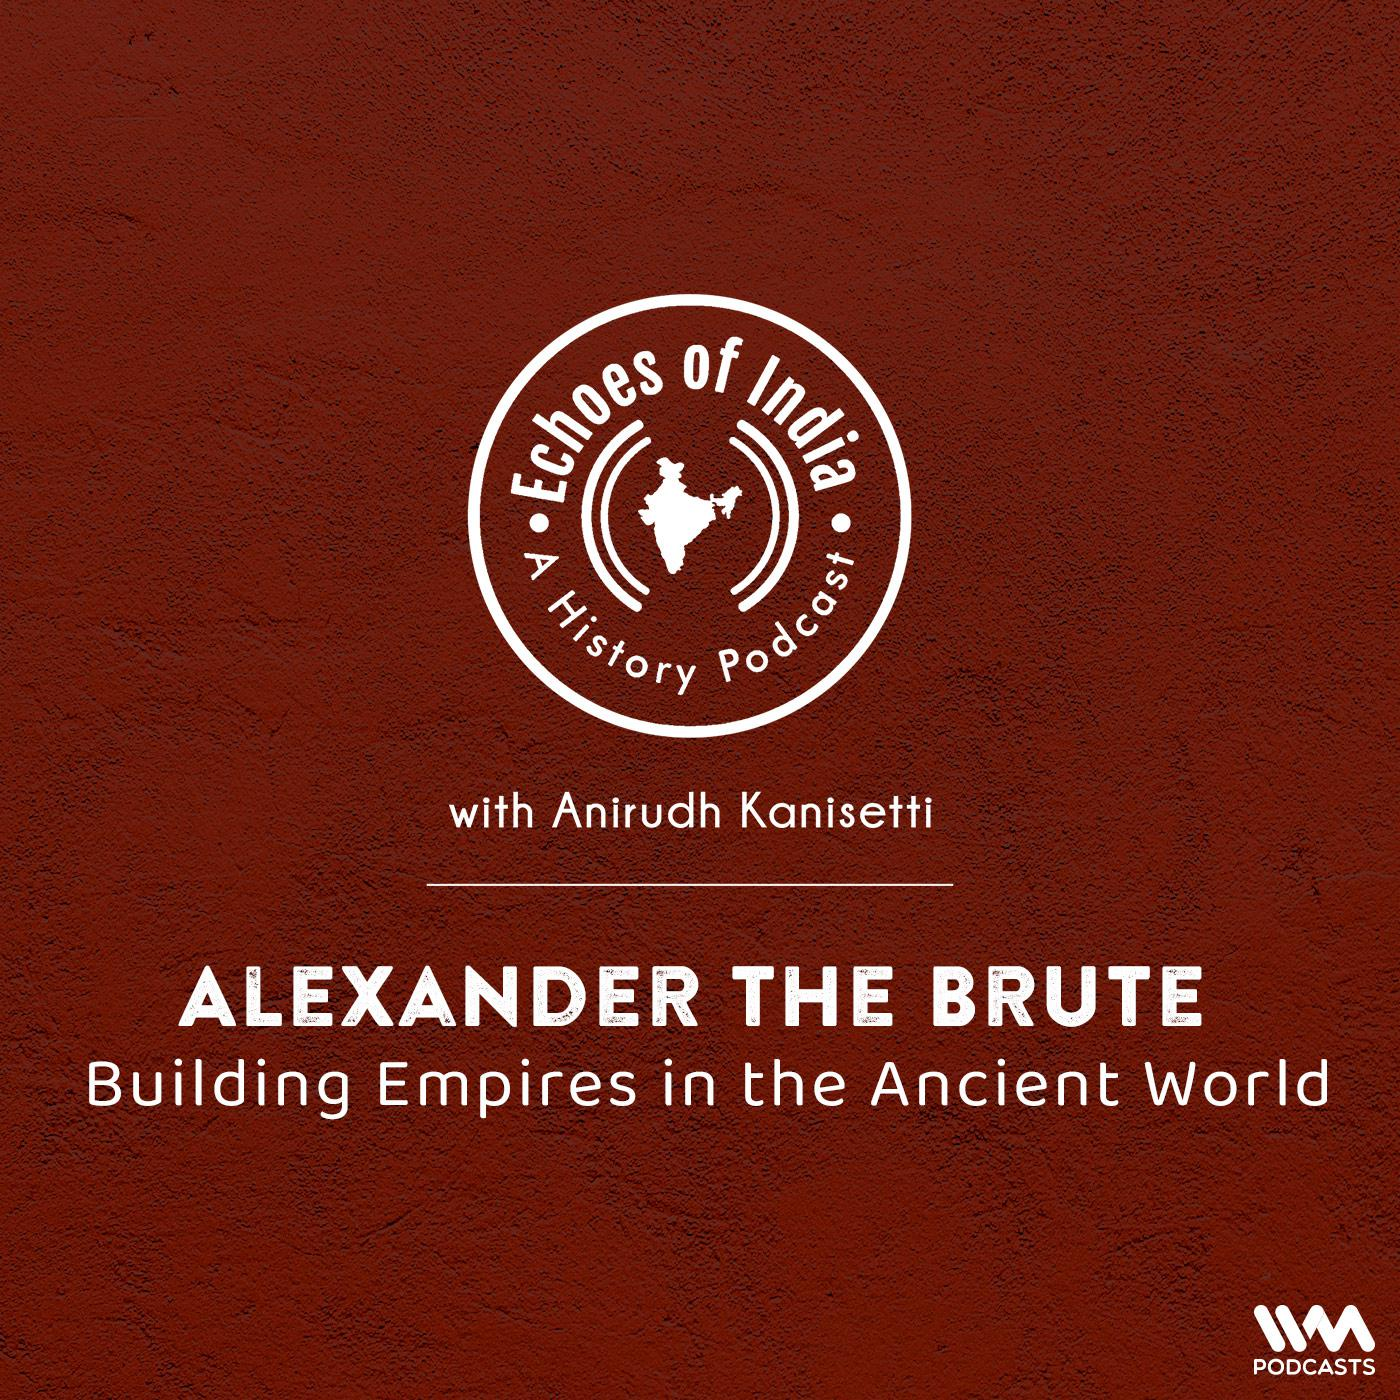 Alexander the Brute: Building Empires in the Ancient World